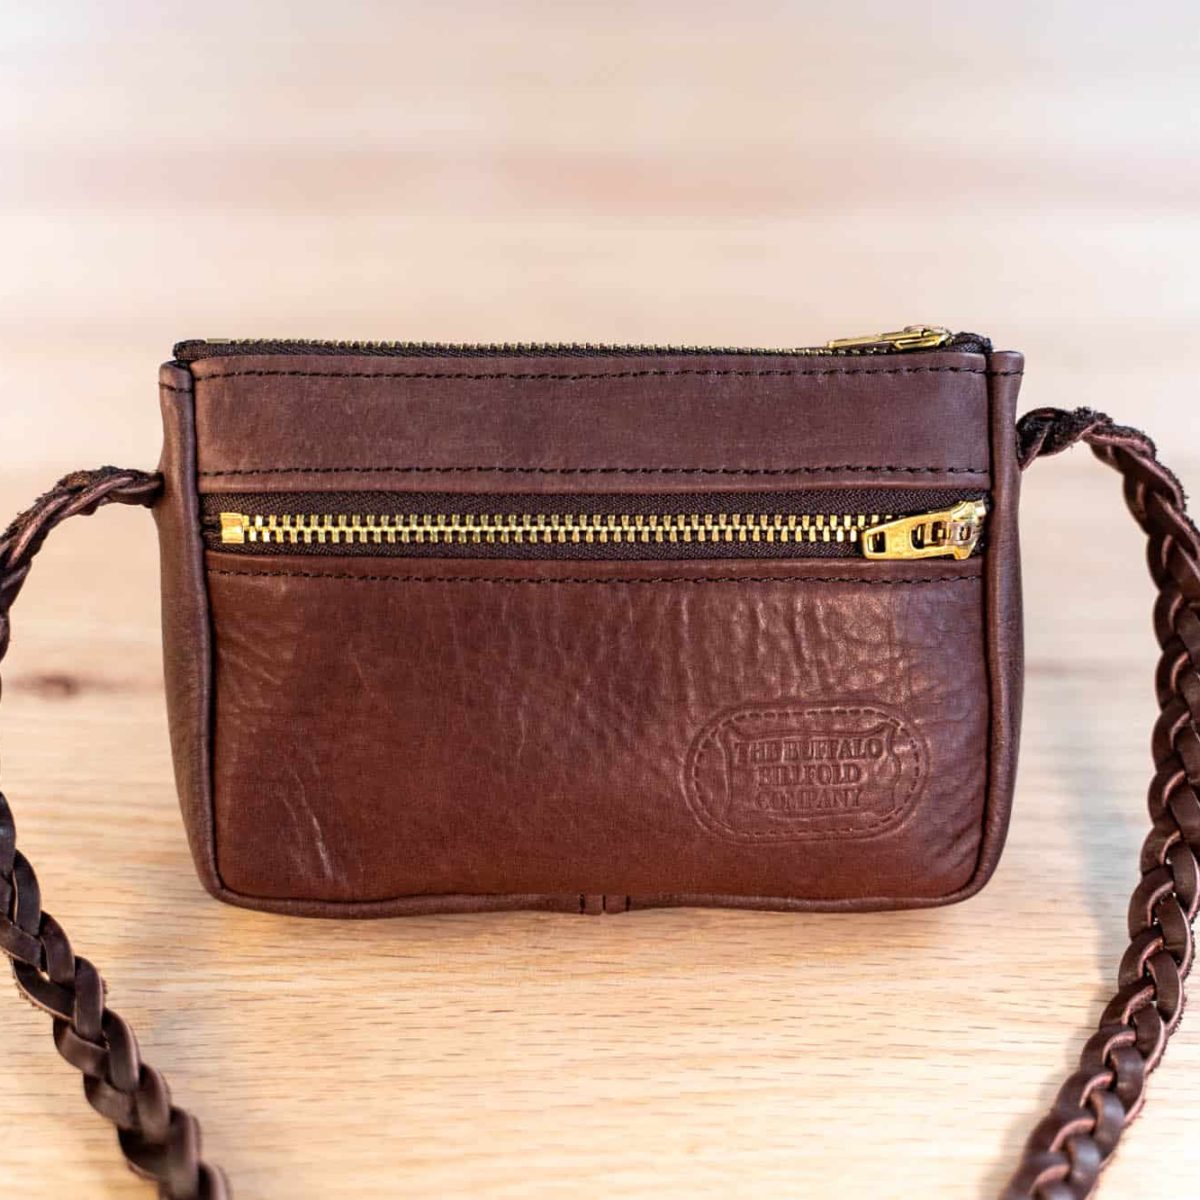 Small Zipper Bag with Braided Leather Strap